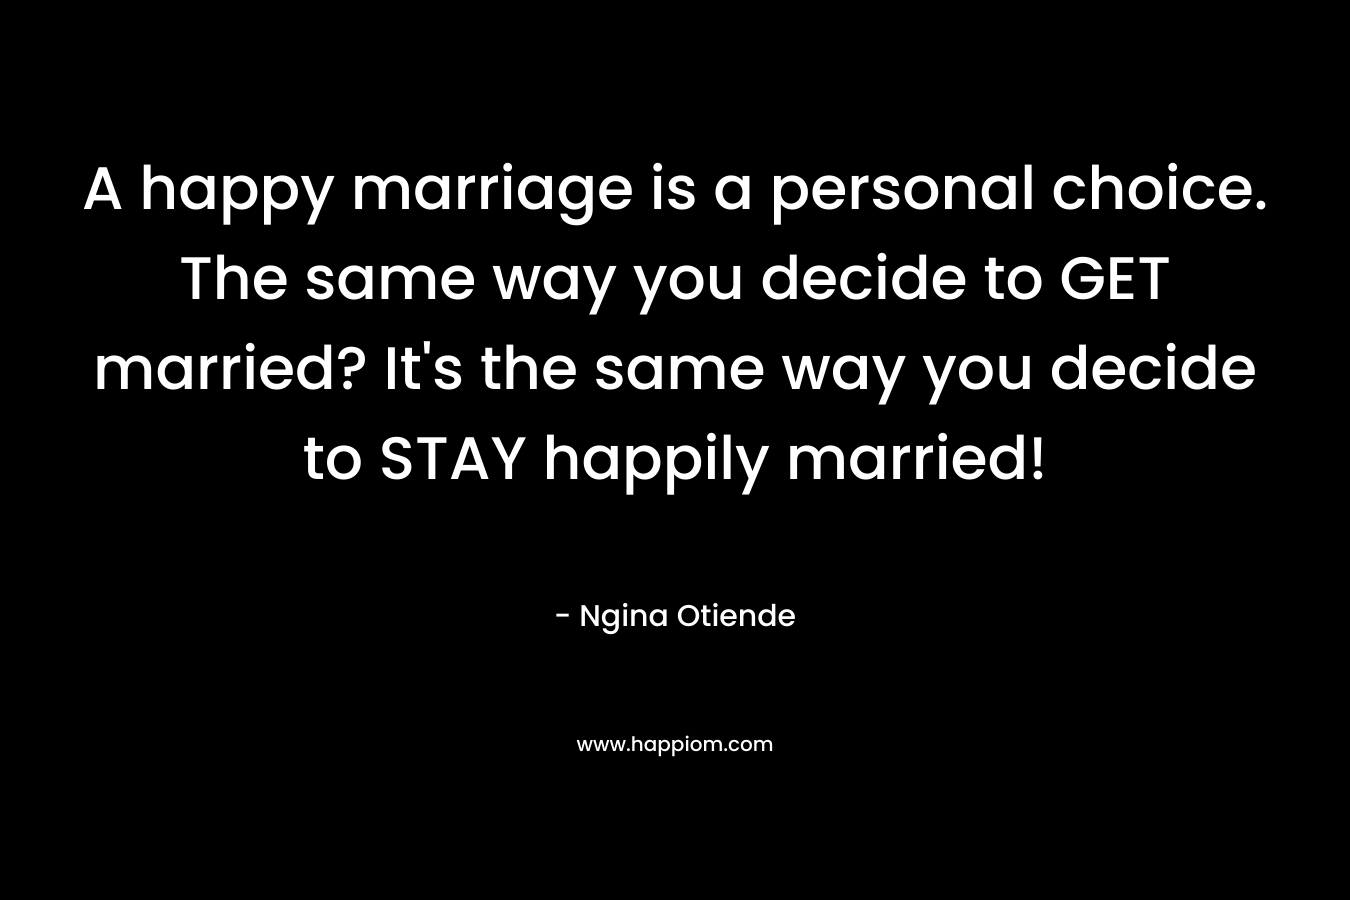 A happy marriage is a personal choice. The same way you decide to GET married? It's the same way you decide to STAY happily married!